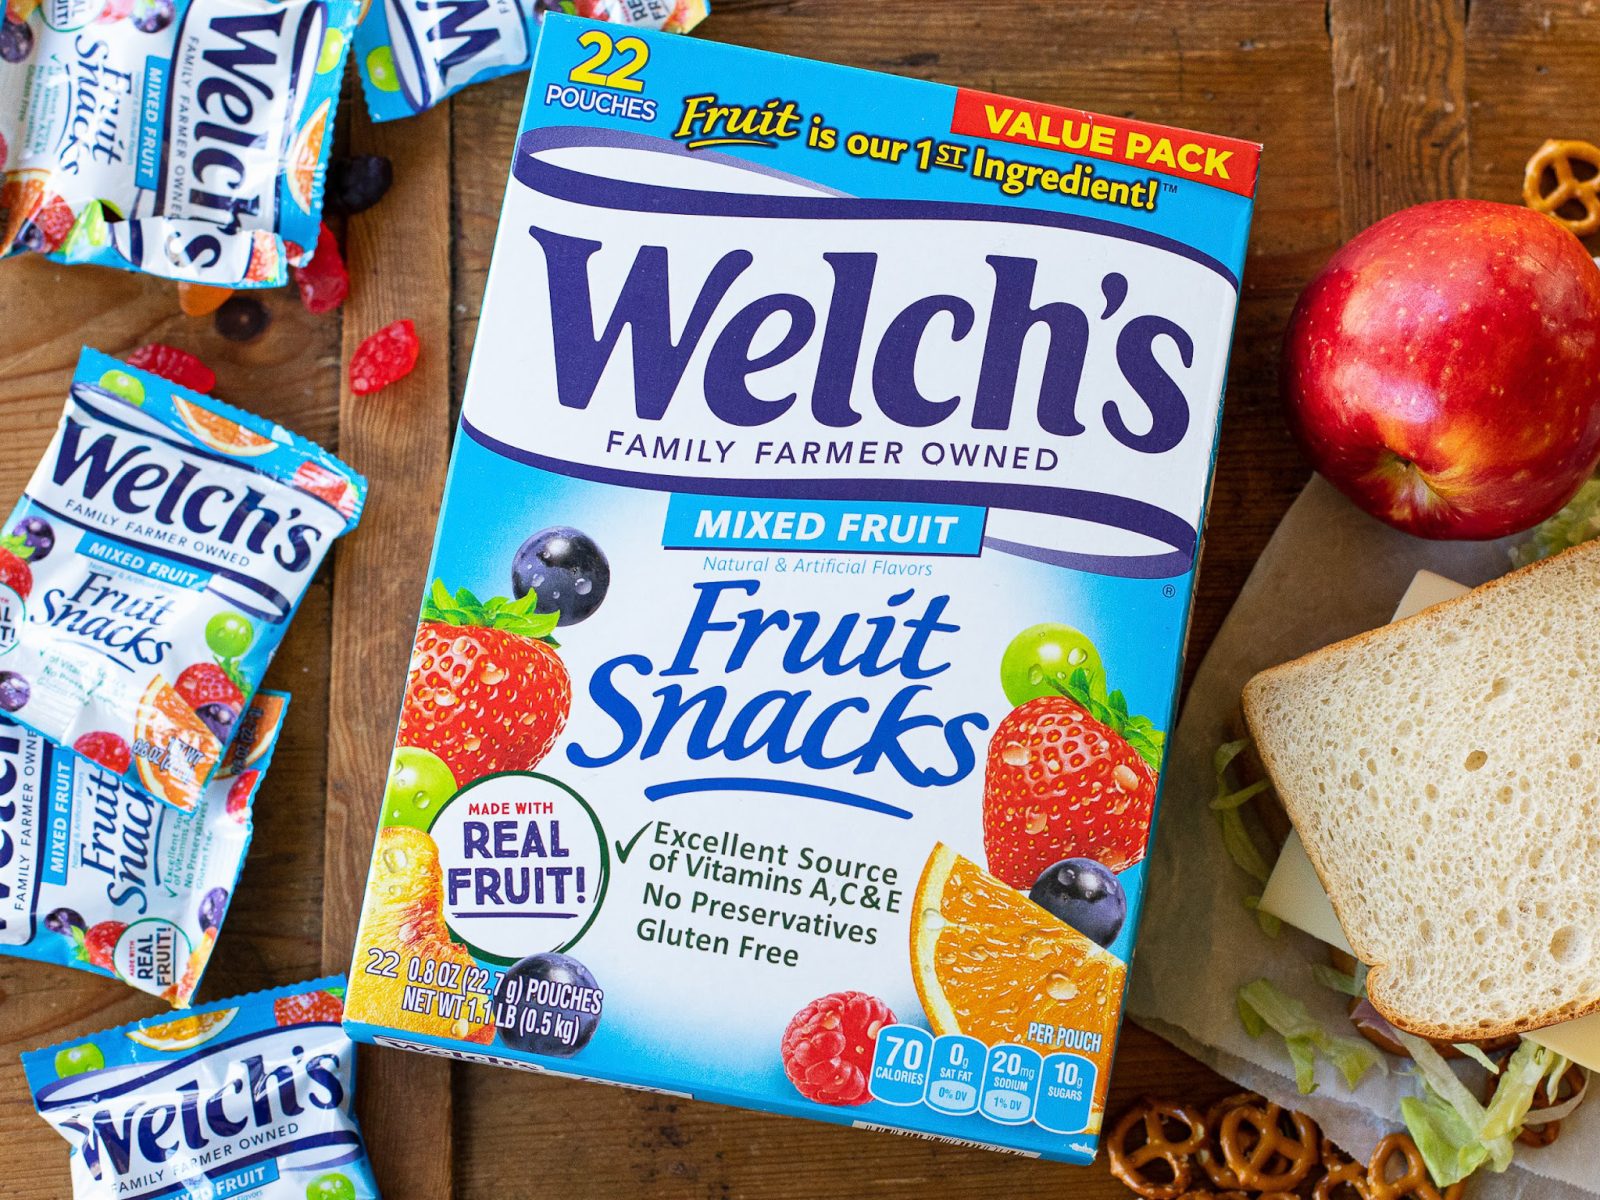 Big Boxes Welch’s Fruit Snacks As Low As $2.40 Per Box At Publix (Regular Price $6.79)